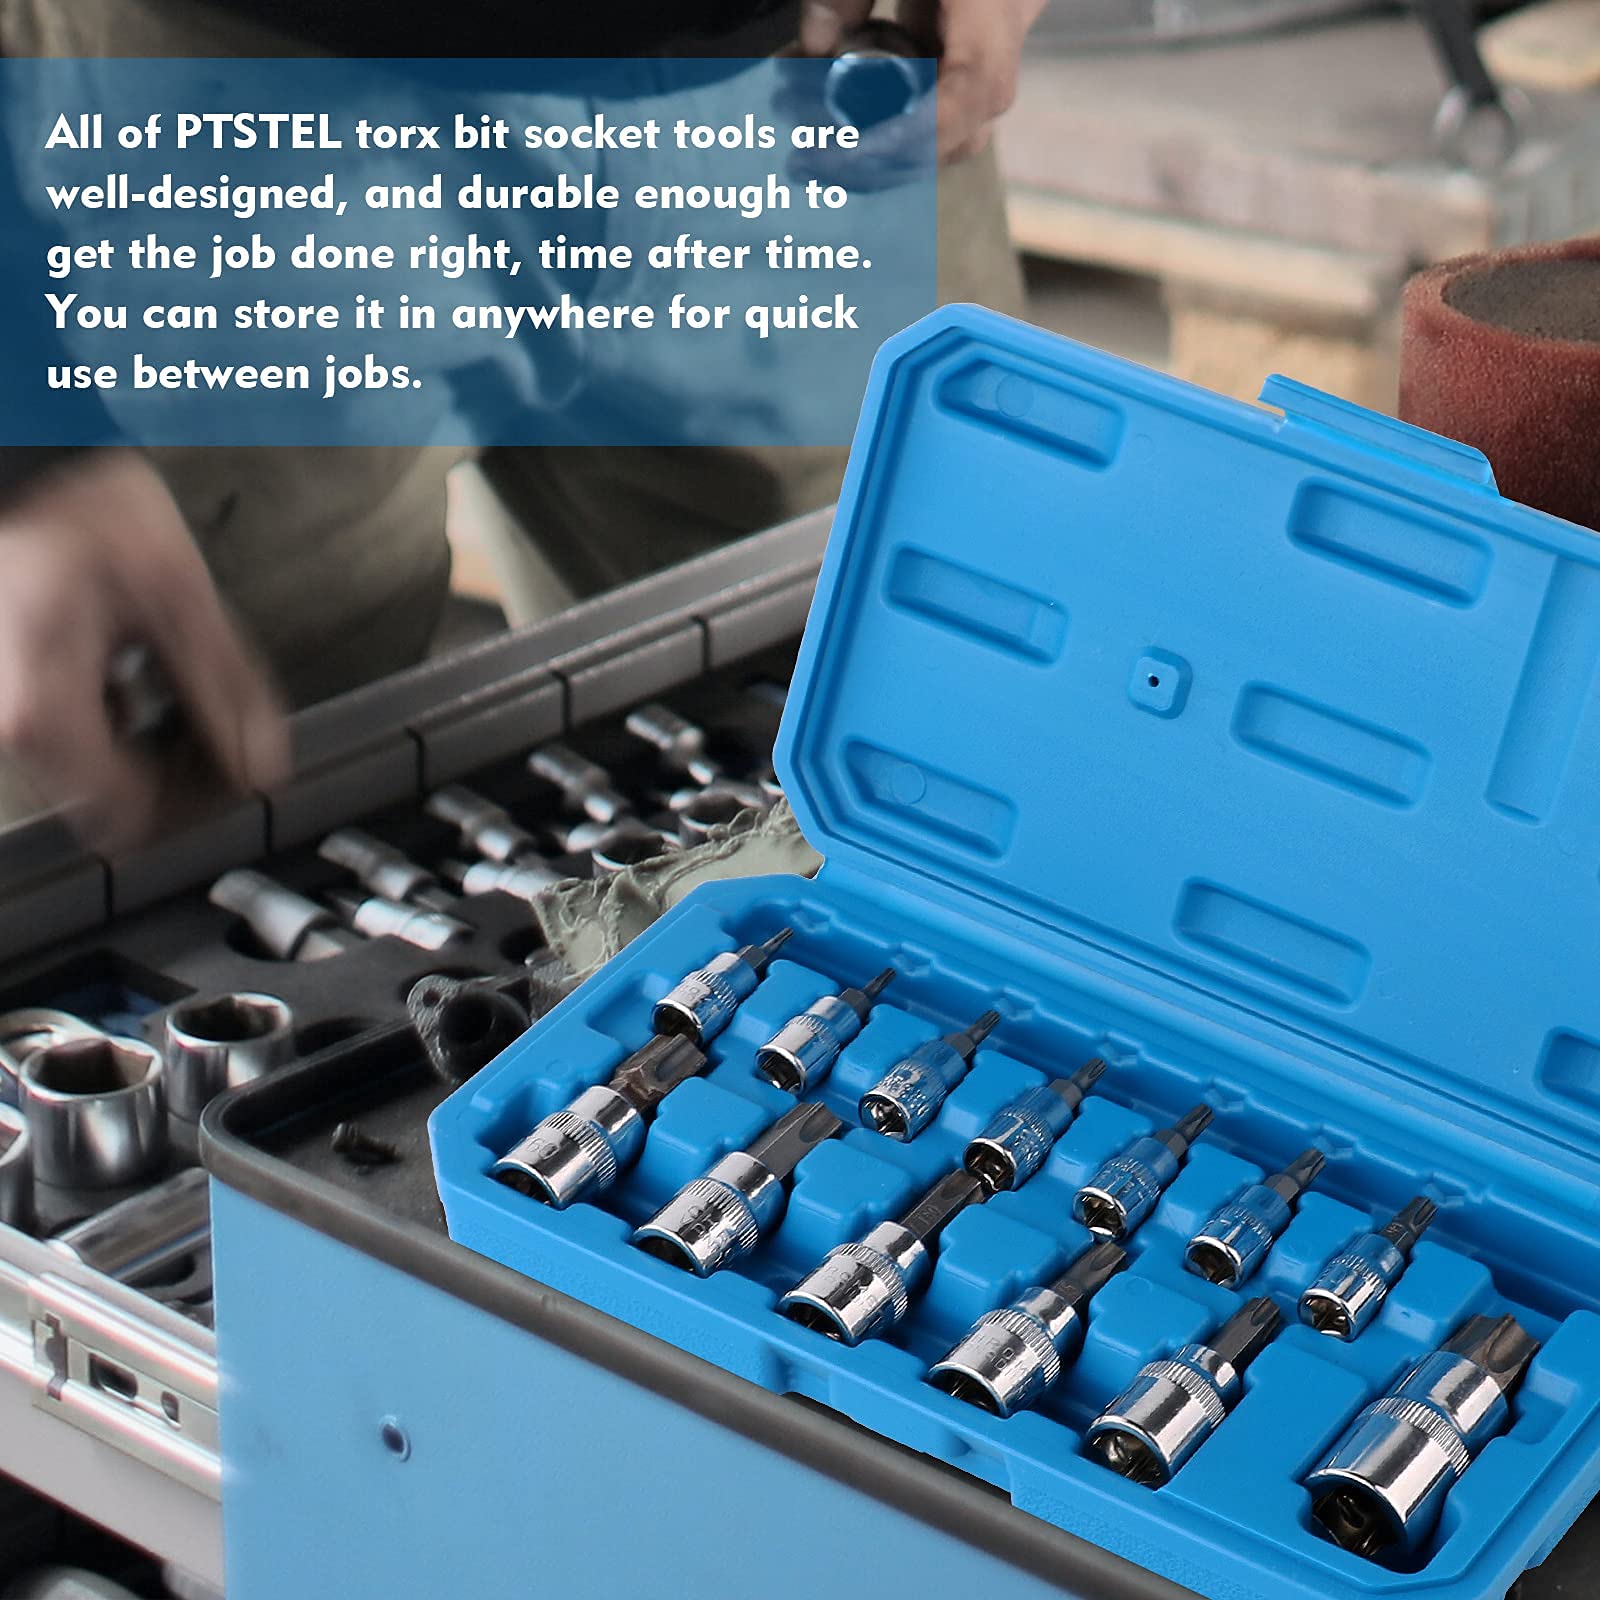 PTSTEL 13Pcs Torx Bit Socket Set T8-T70 CRV Star Sockets 1/4-inch, 3/8-inch & 1/2-inch Drive For Hand Use Work On Cars, Trucks, Appliances, Lawn Equipment, Machinery, and Other Jobs With Storage Case